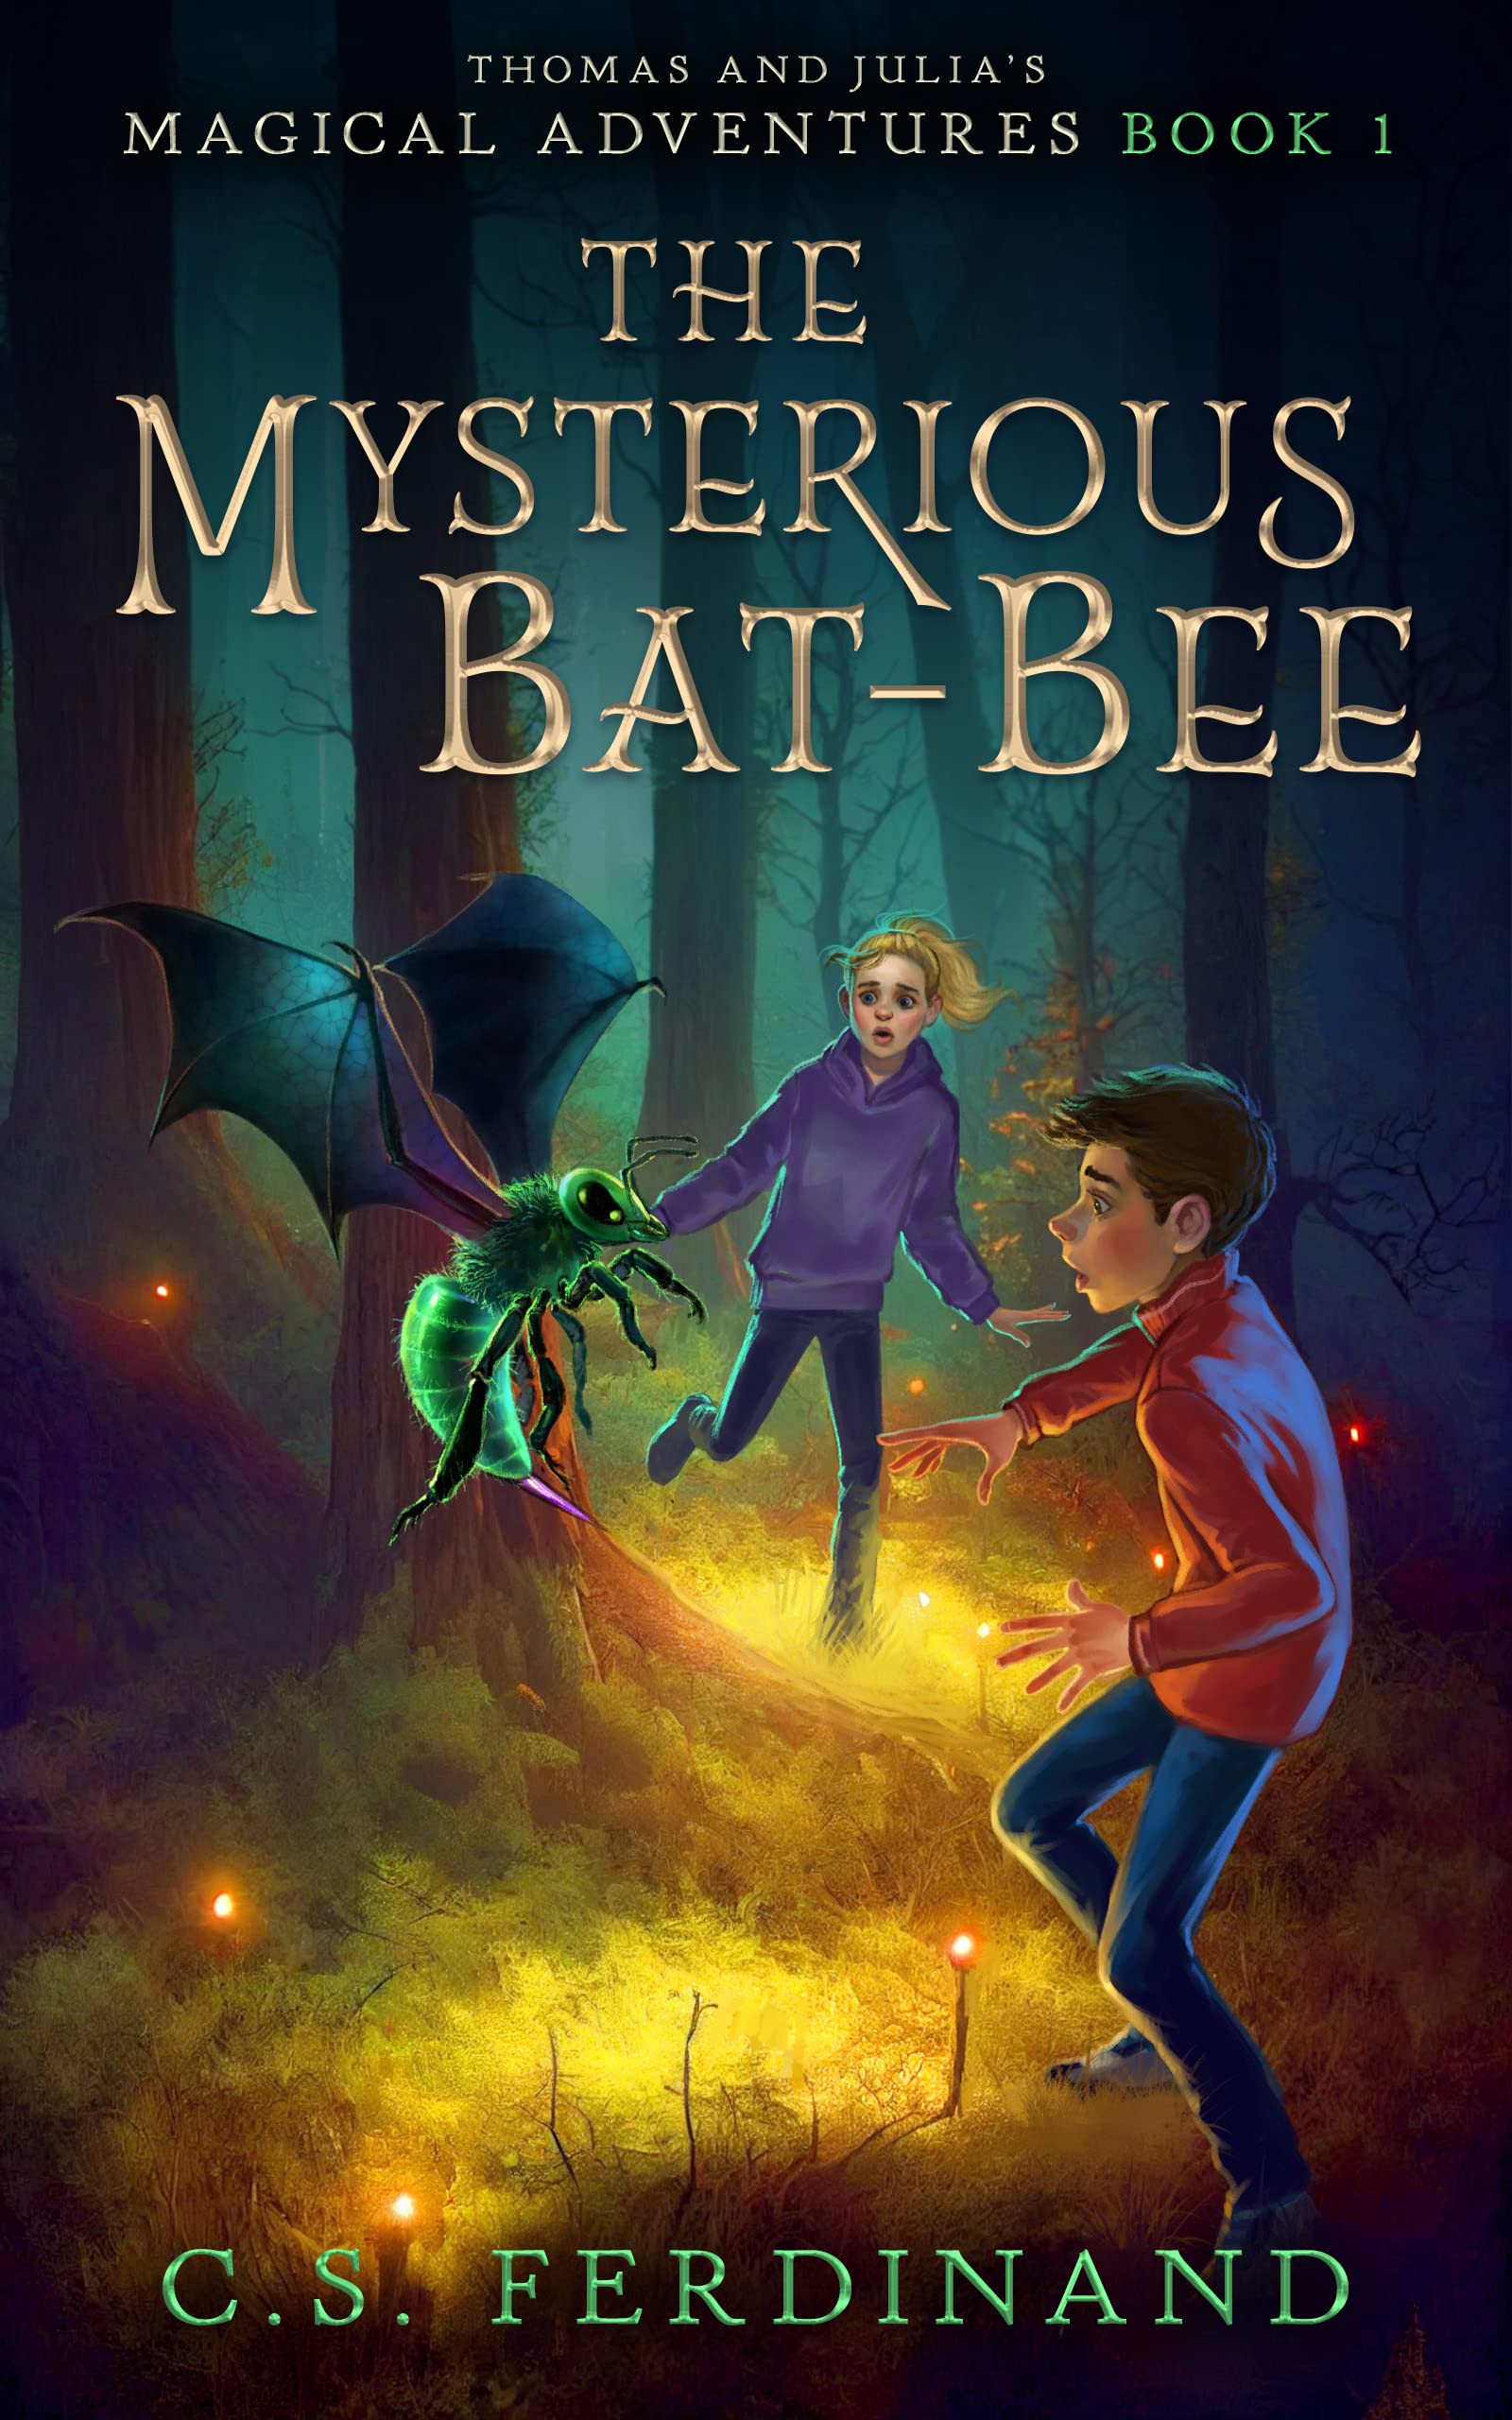 The Mysterious Bat-Bee: A Middle Grade Fantasy Adventure (Thomas and Julia's Magical Adventures Book 1)